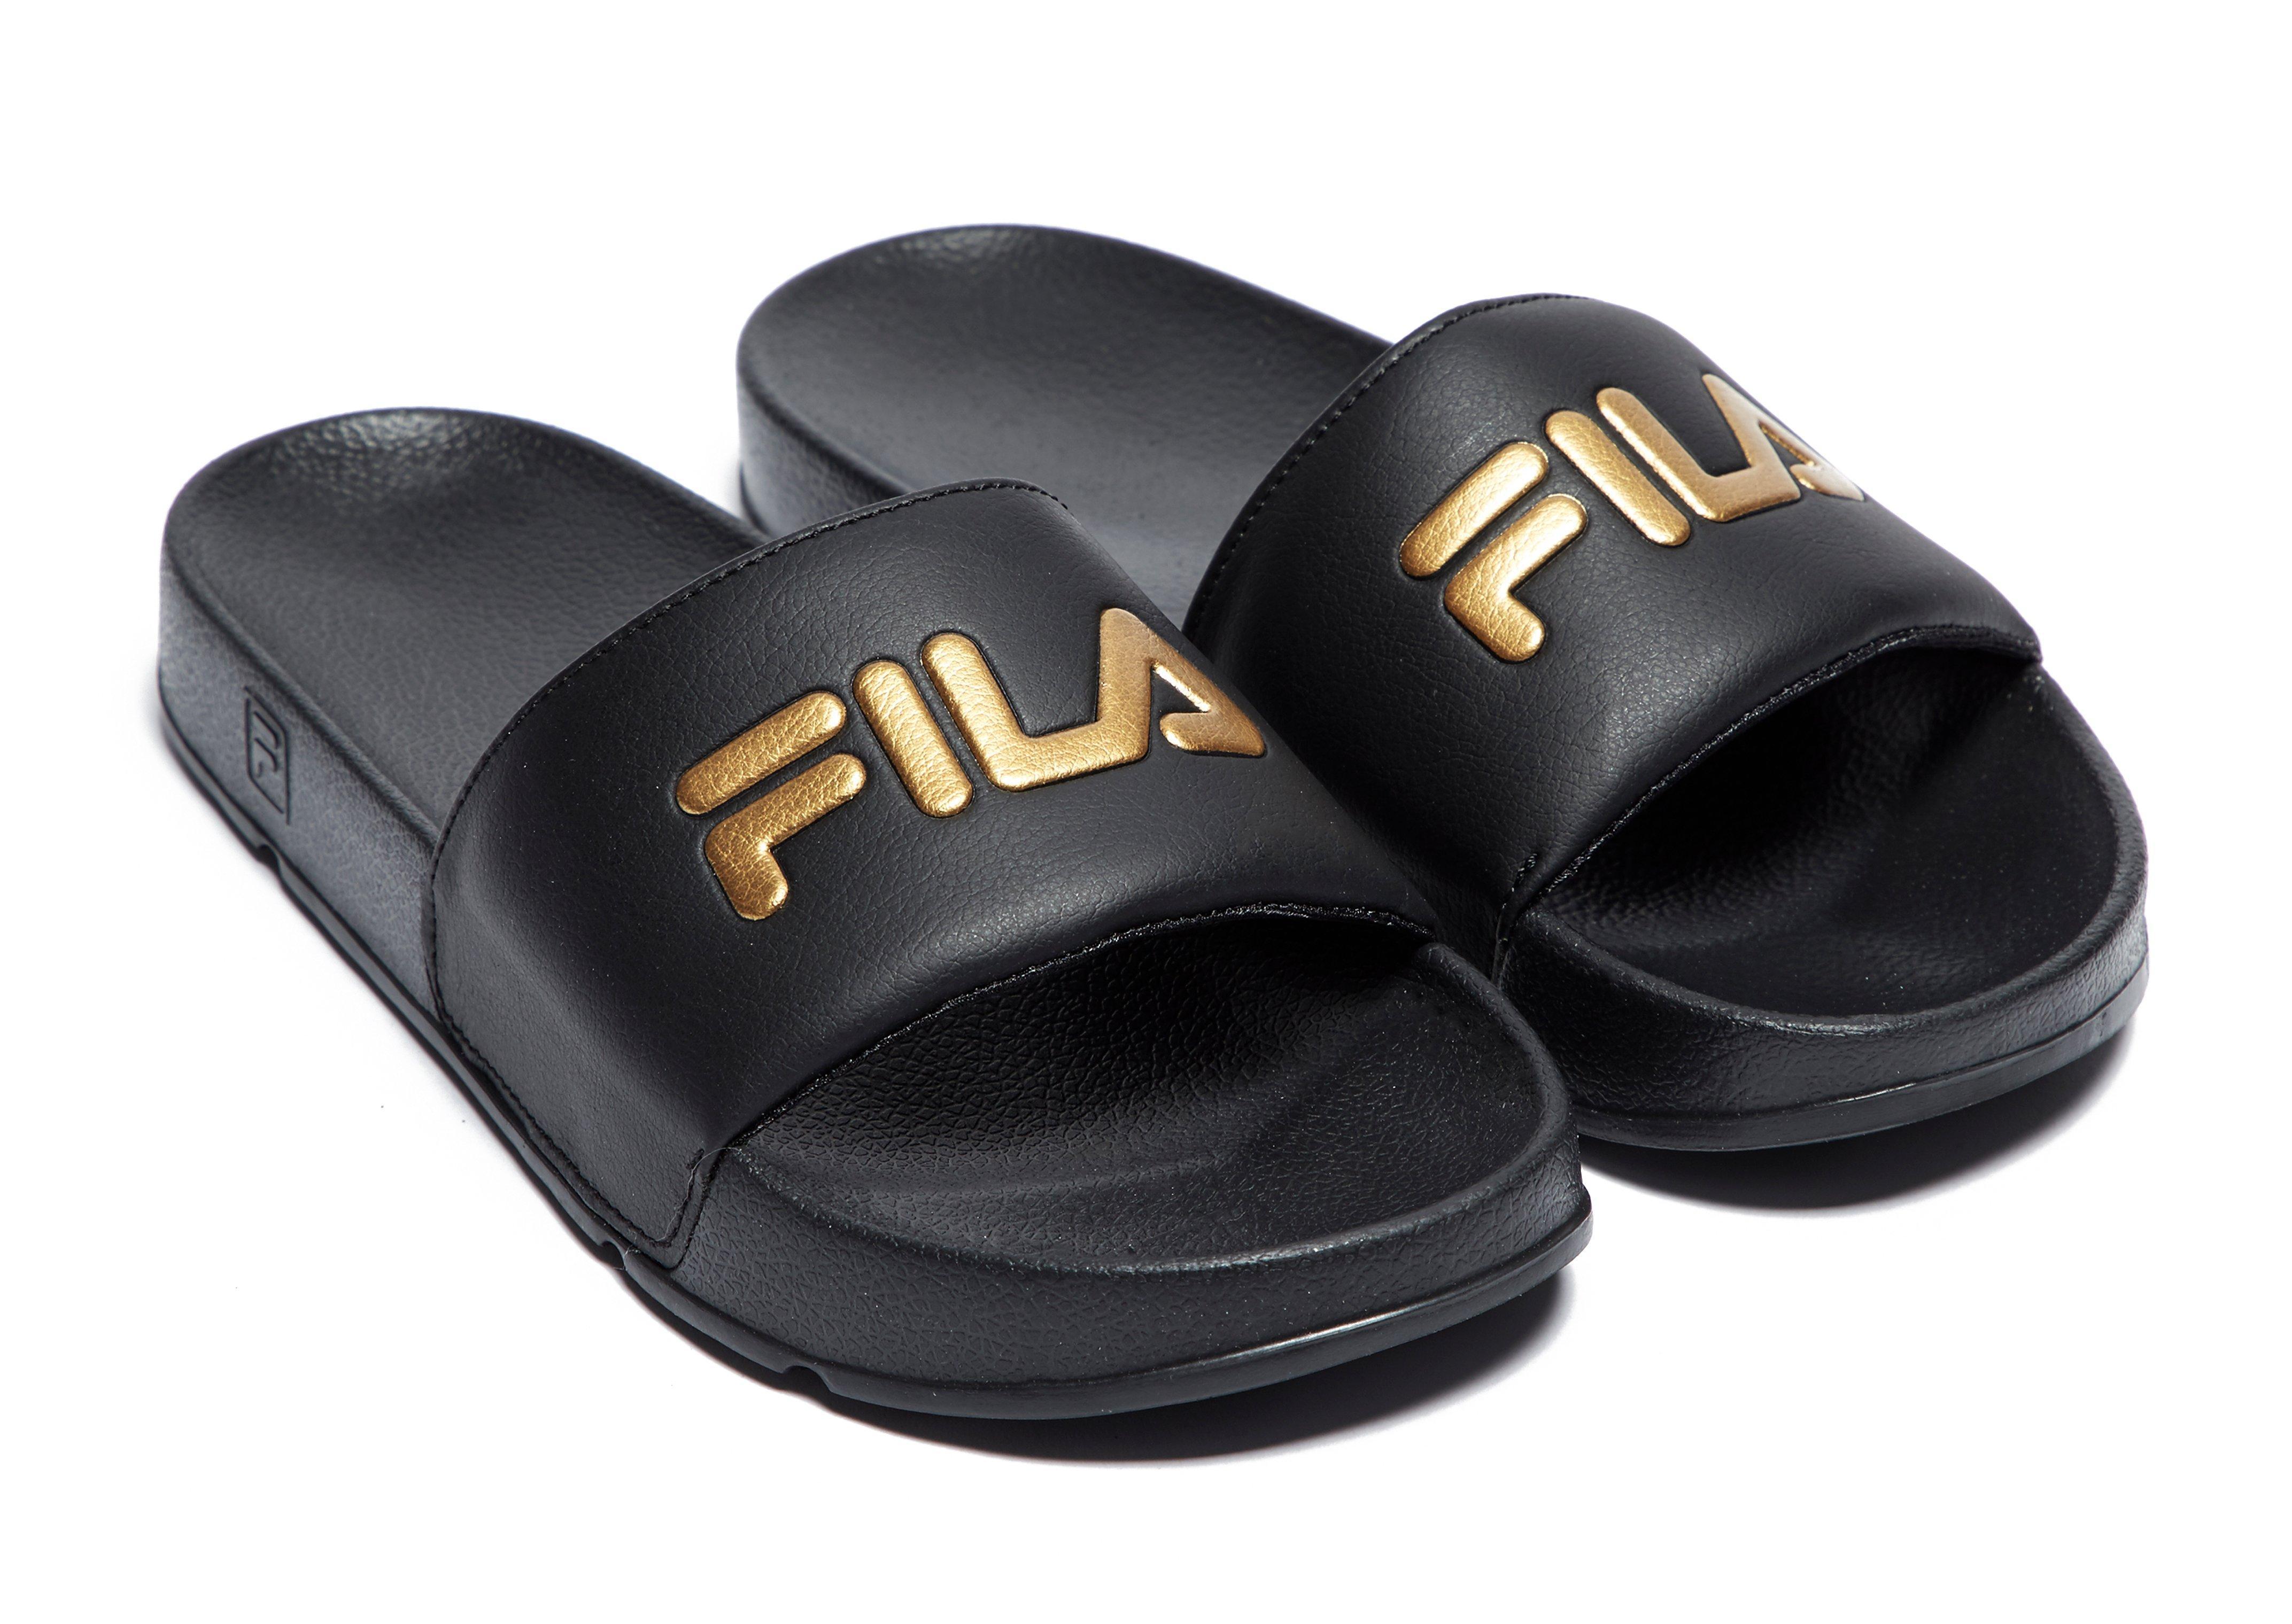 fila slippers online,www.autoconnective.in